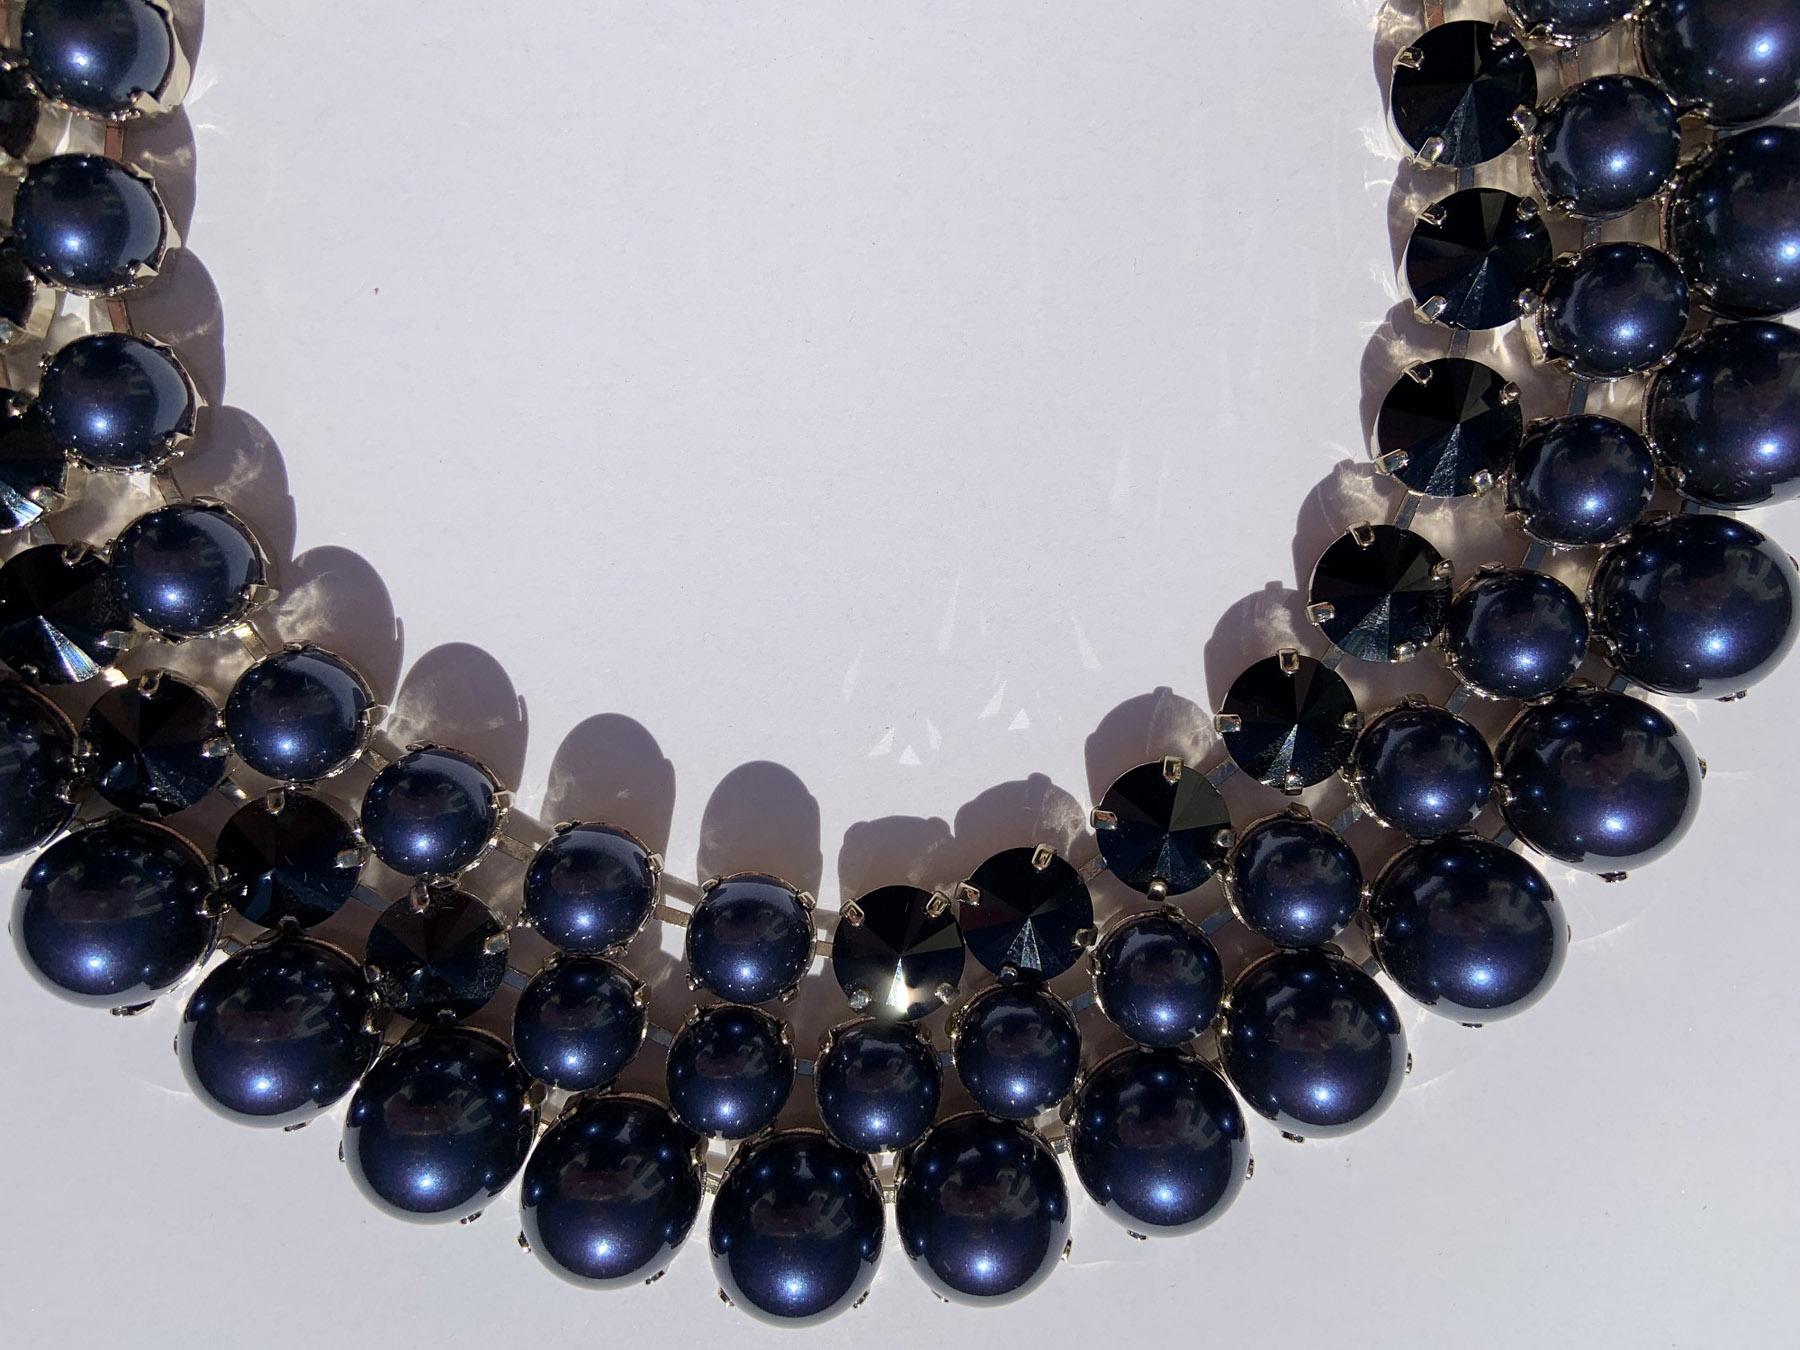 New Gucci Navy Blue and Black Necklace
Intricately Crafted with Blue Pearl Effect Glass and Black Swarovski Crystals.
Adjustable Lobster Clasp Closure with Crystal Interlocking G Detail.
Gold-tone Metal Hardware, Engraved *Gucci* Brand on Back.